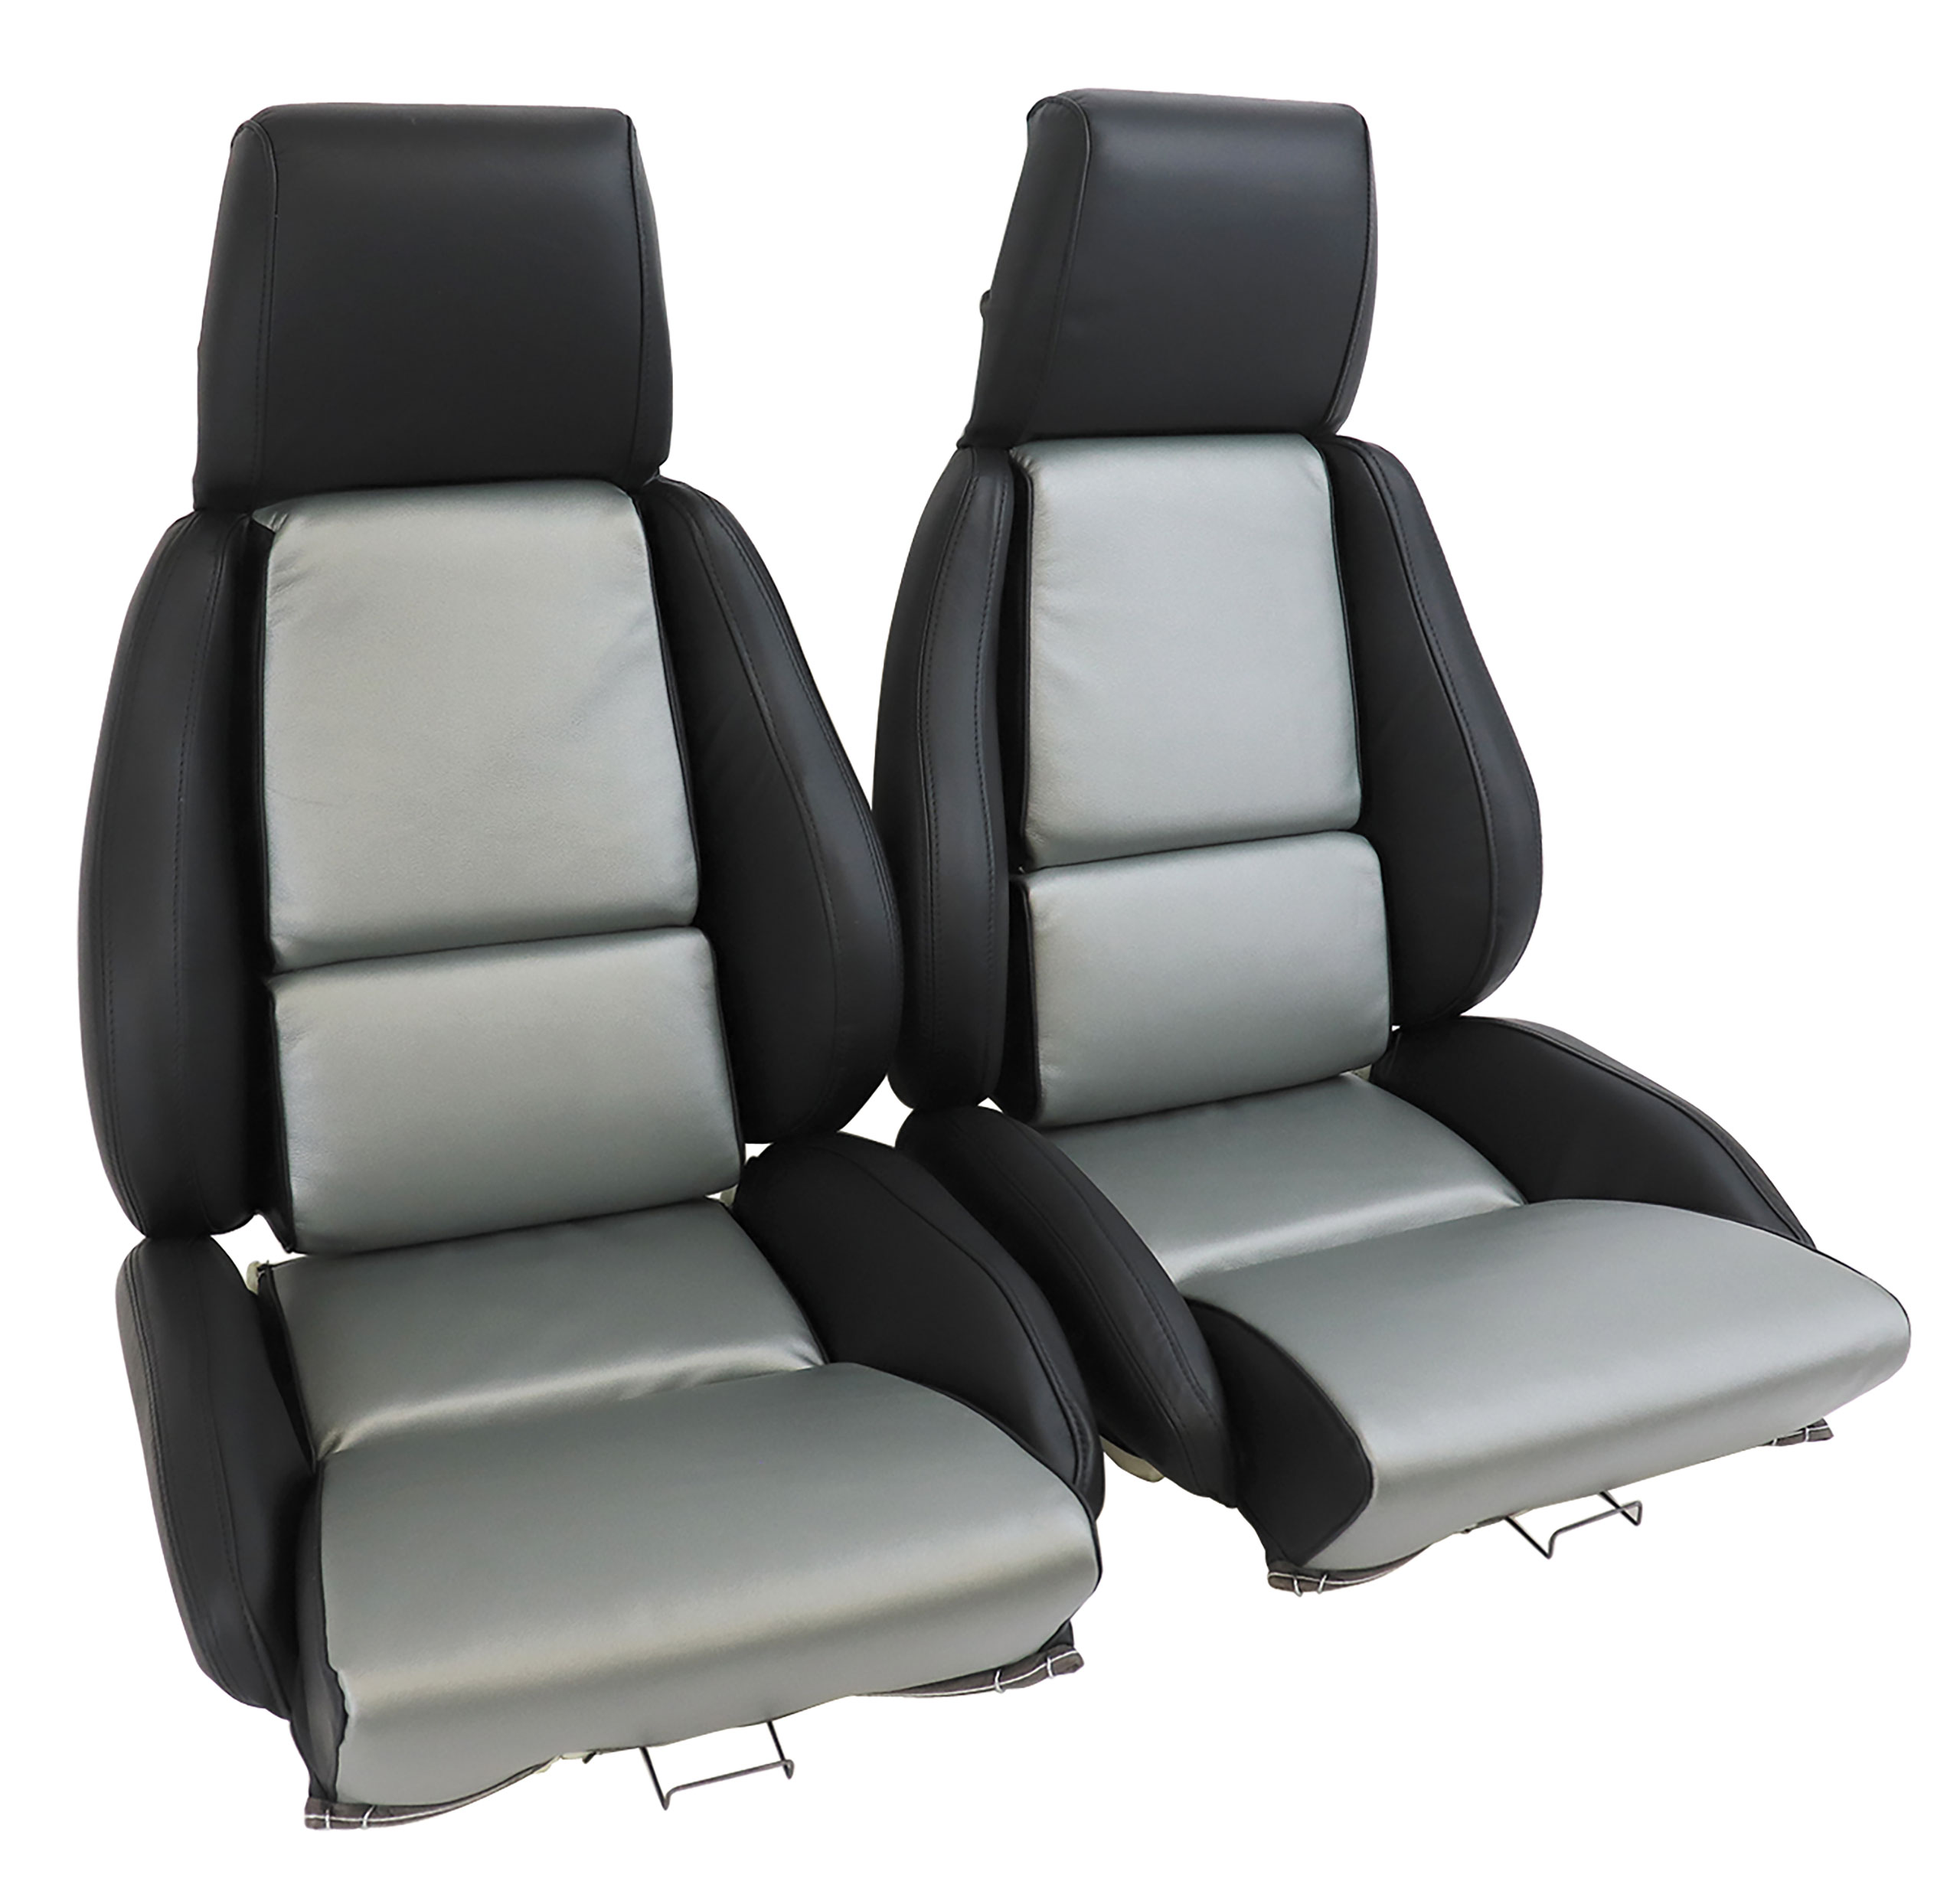 1984-1988 C4 Corvette Mounted 100% Leather Standard Seat Covers - Black /Gray 2-Tone